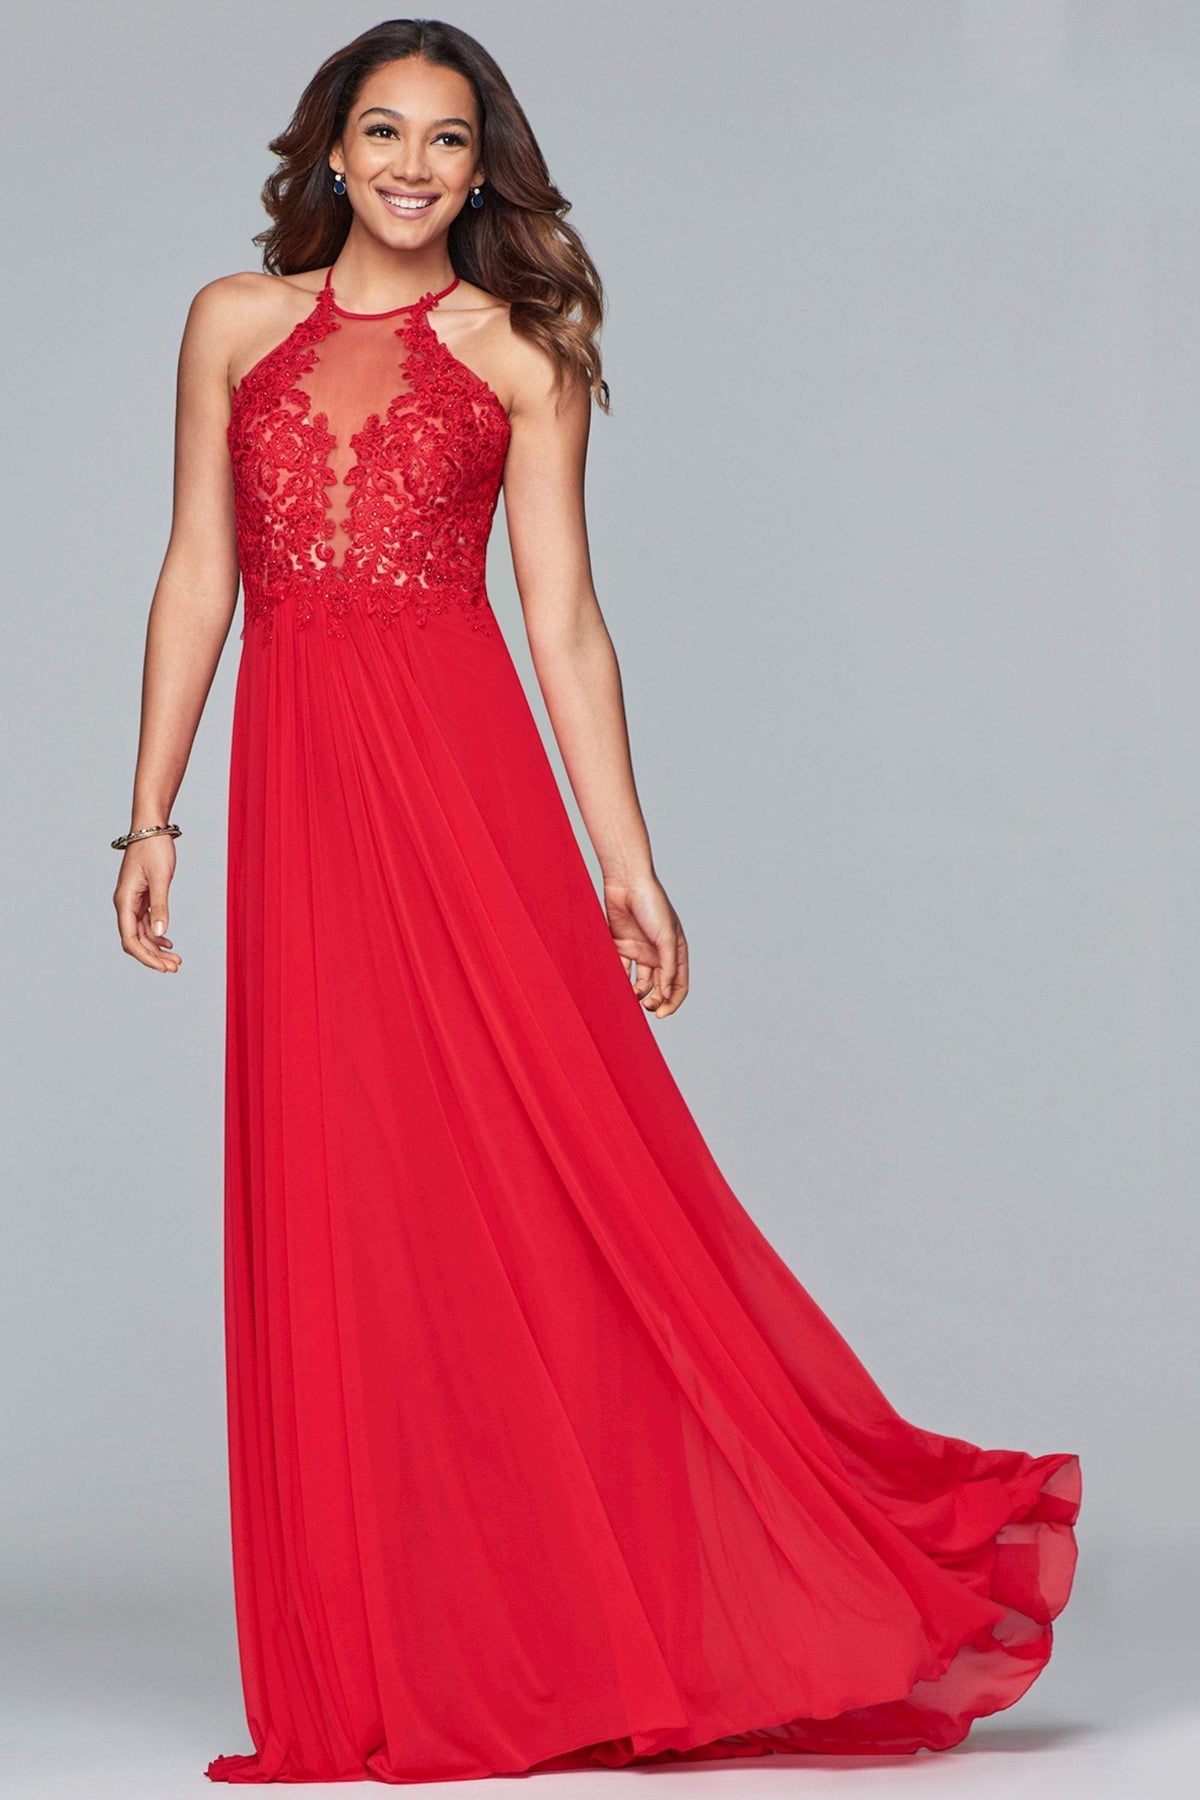 Faviana - Lace Appliqued Illusion Halter Evening Dress S10203  In Red